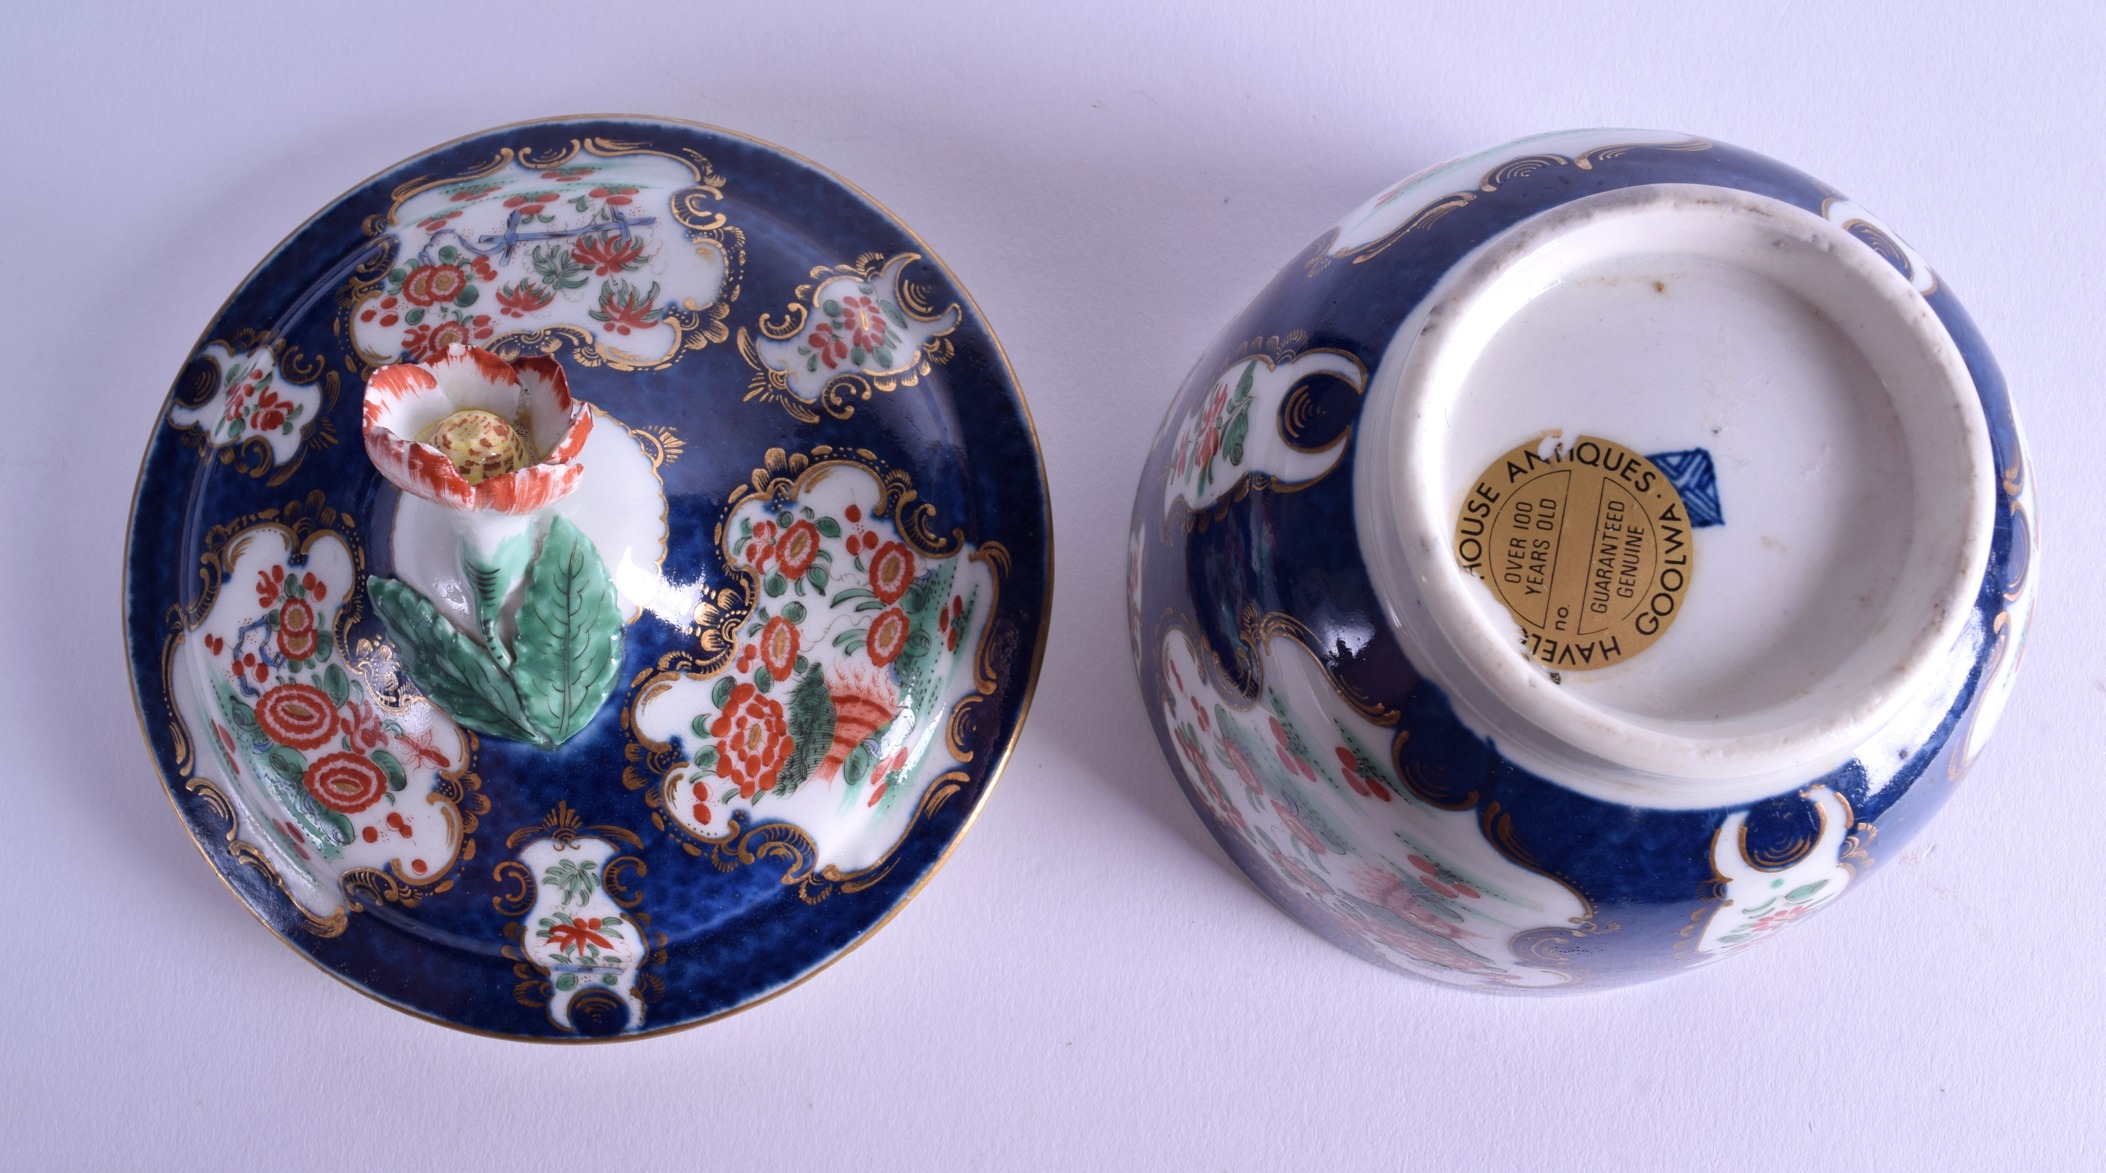 18th c. Worcester sugar bowl and cover painted with kakiemon style flowers on a blue scale ground, - Image 3 of 3